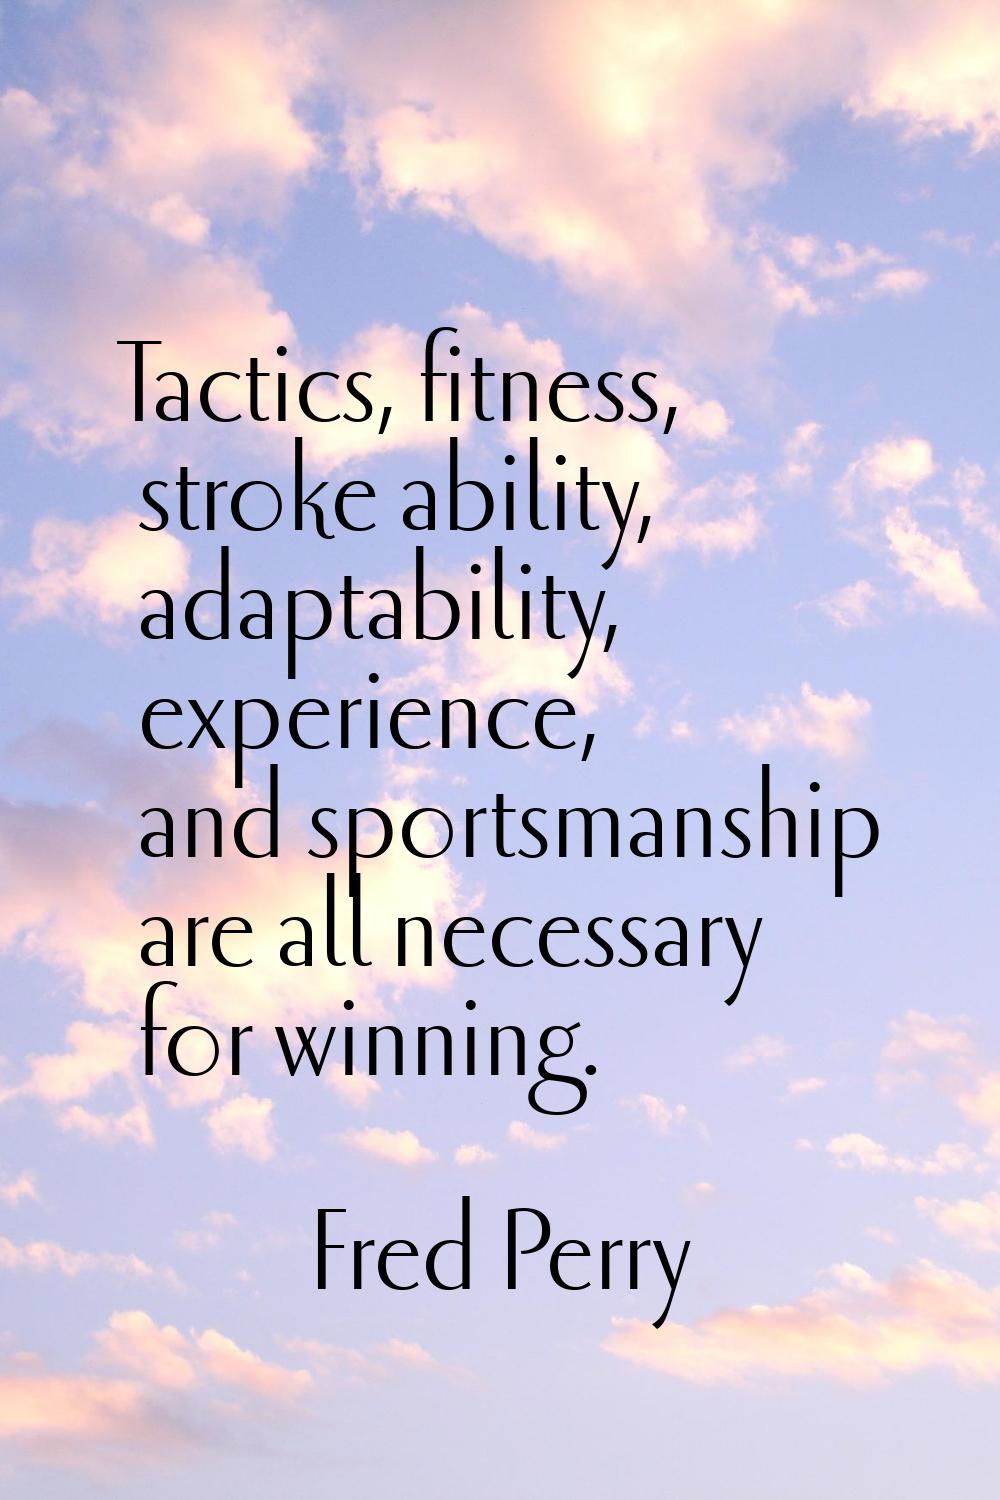 Tactics, fitness, stroke ability, adaptability, experience, and sportsmanship are all necessary for